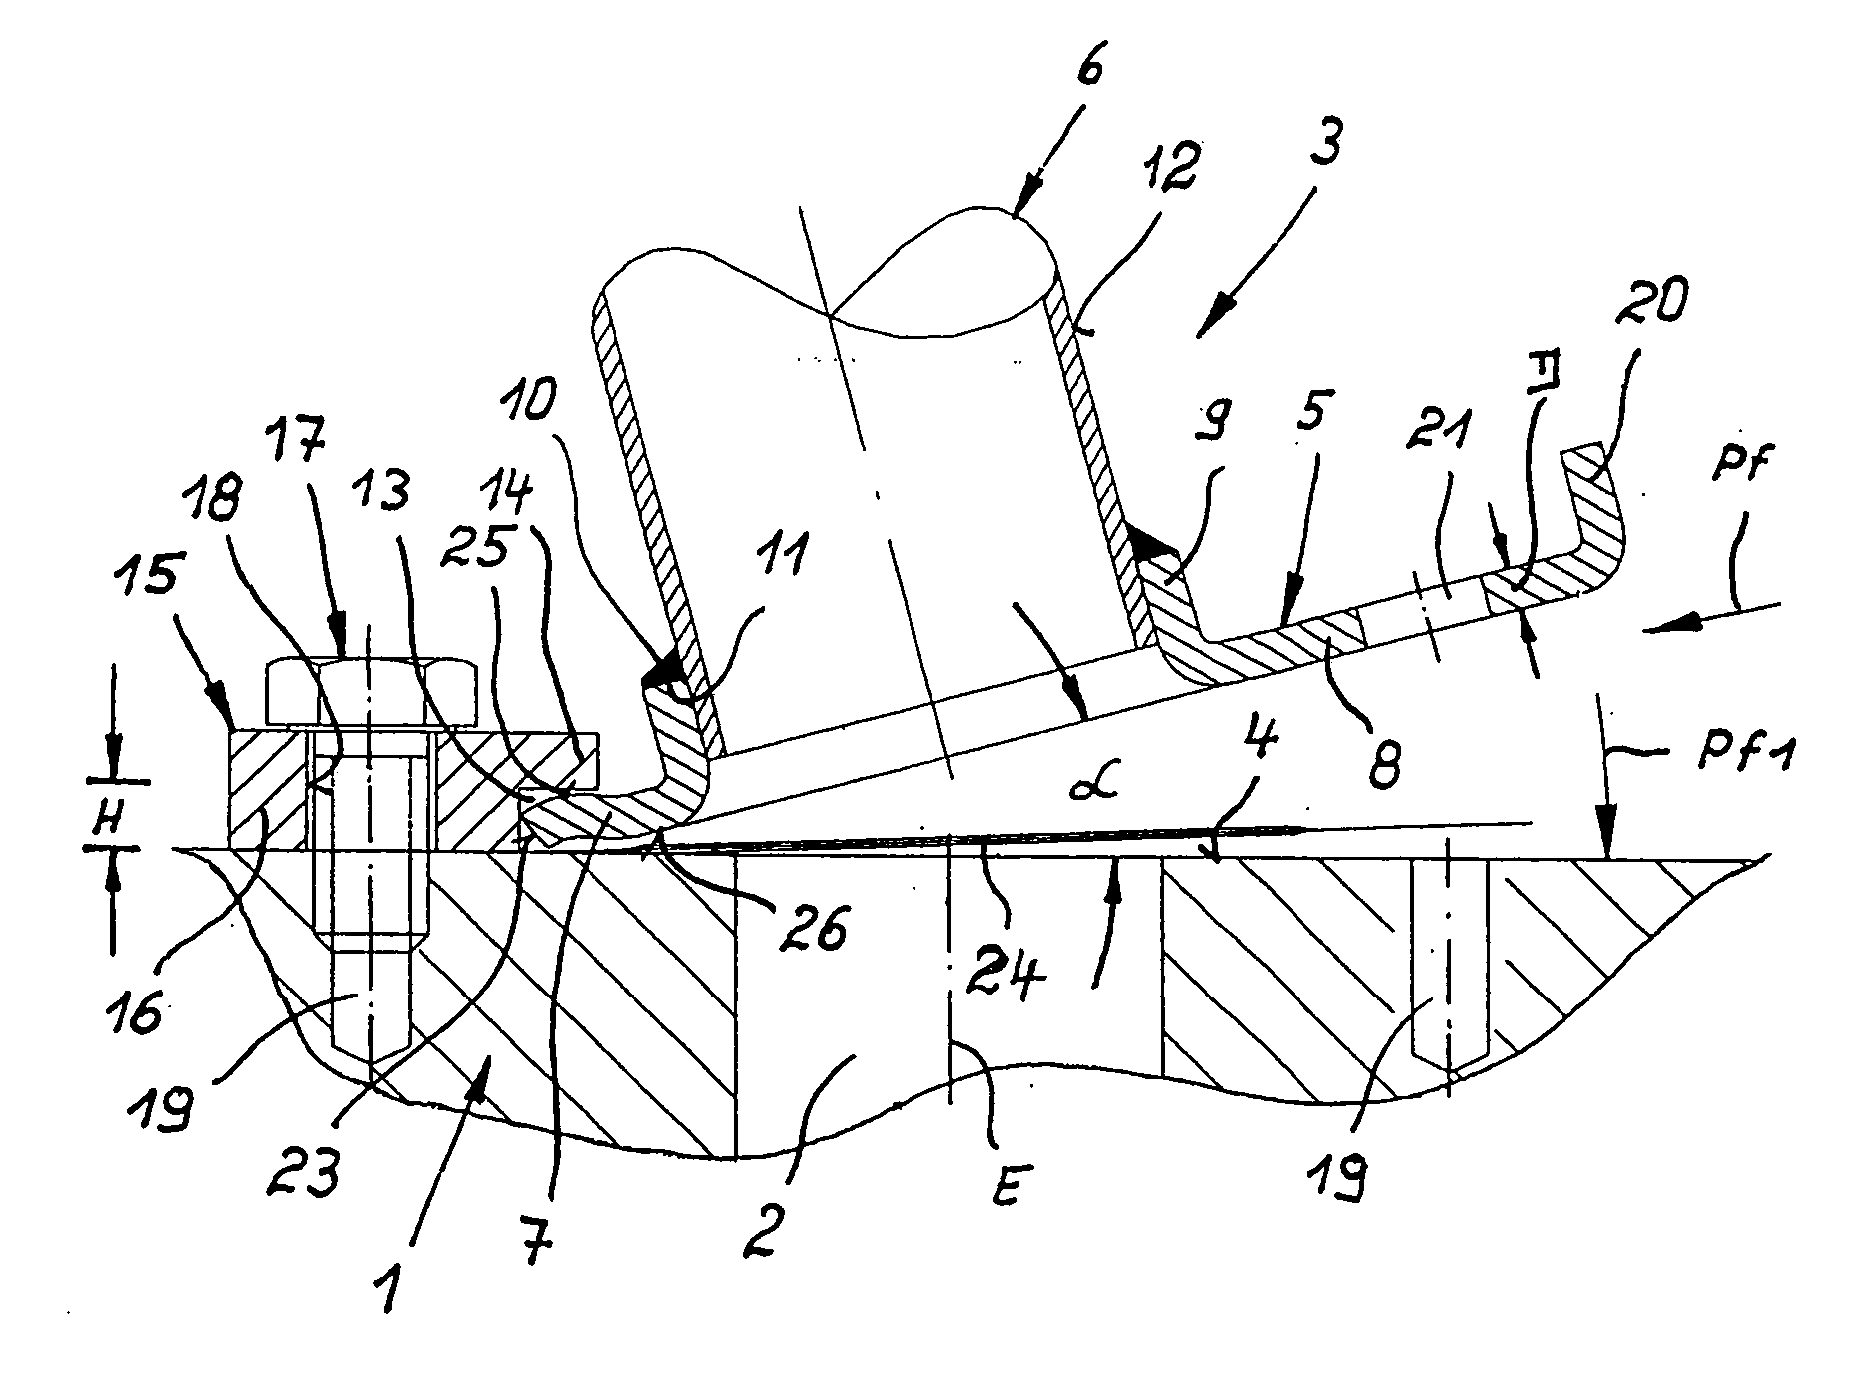 Arrangement for securely mounting an exhaust manifold to the cylinder head of an internal combustion engine